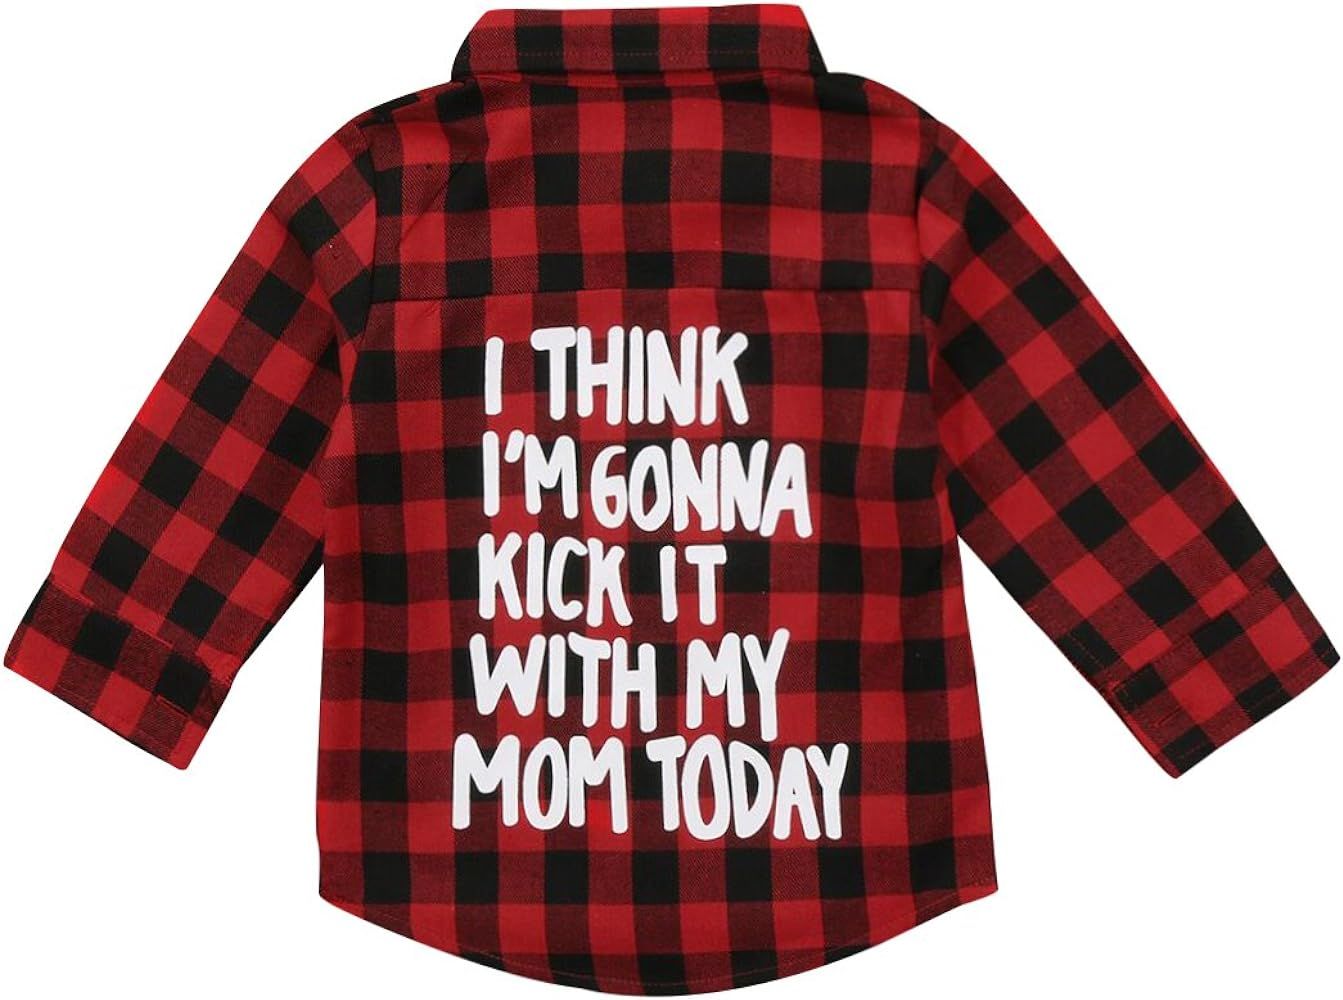 Unisex Toddler Kids Baby Girls Boys Red Printed Plaid Shirt Long Sleeve Tops Casual Clothes | Amazon (US)